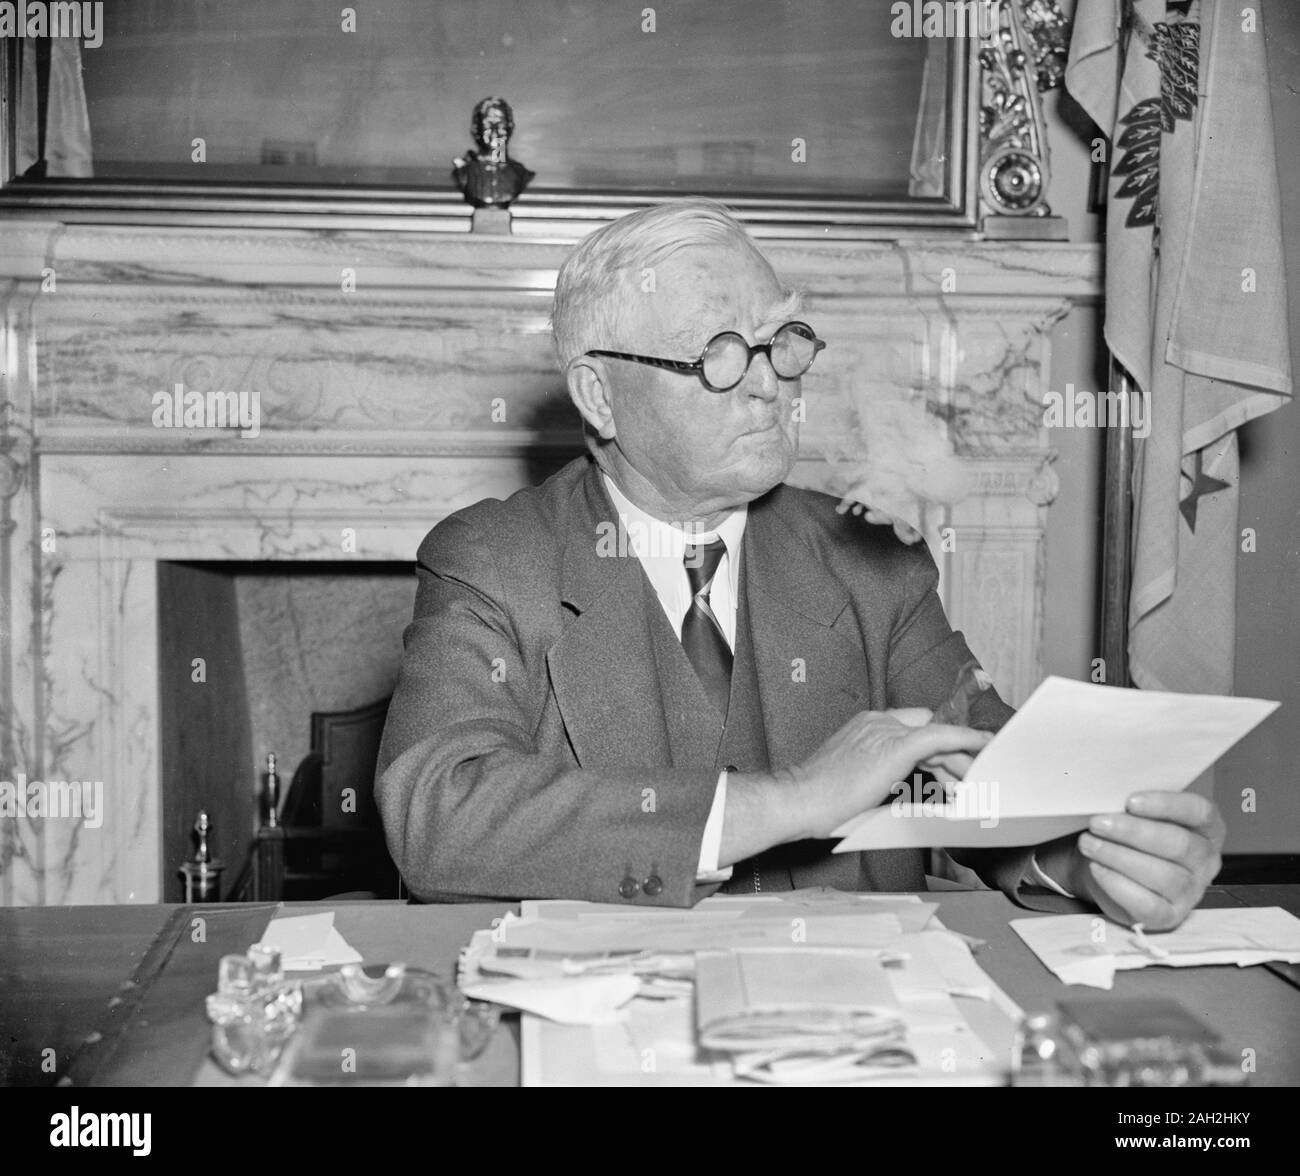 V.P. Garner back on the job. Washington, D.C., Dec. 17. Fully rested from a 6-months vacation at his home in Texas, Vice President John N. Garner returned to his desk at the Capitol today. A conference with President Roosevelt was the highlight of his program today, 12/17/38 Stock Photo